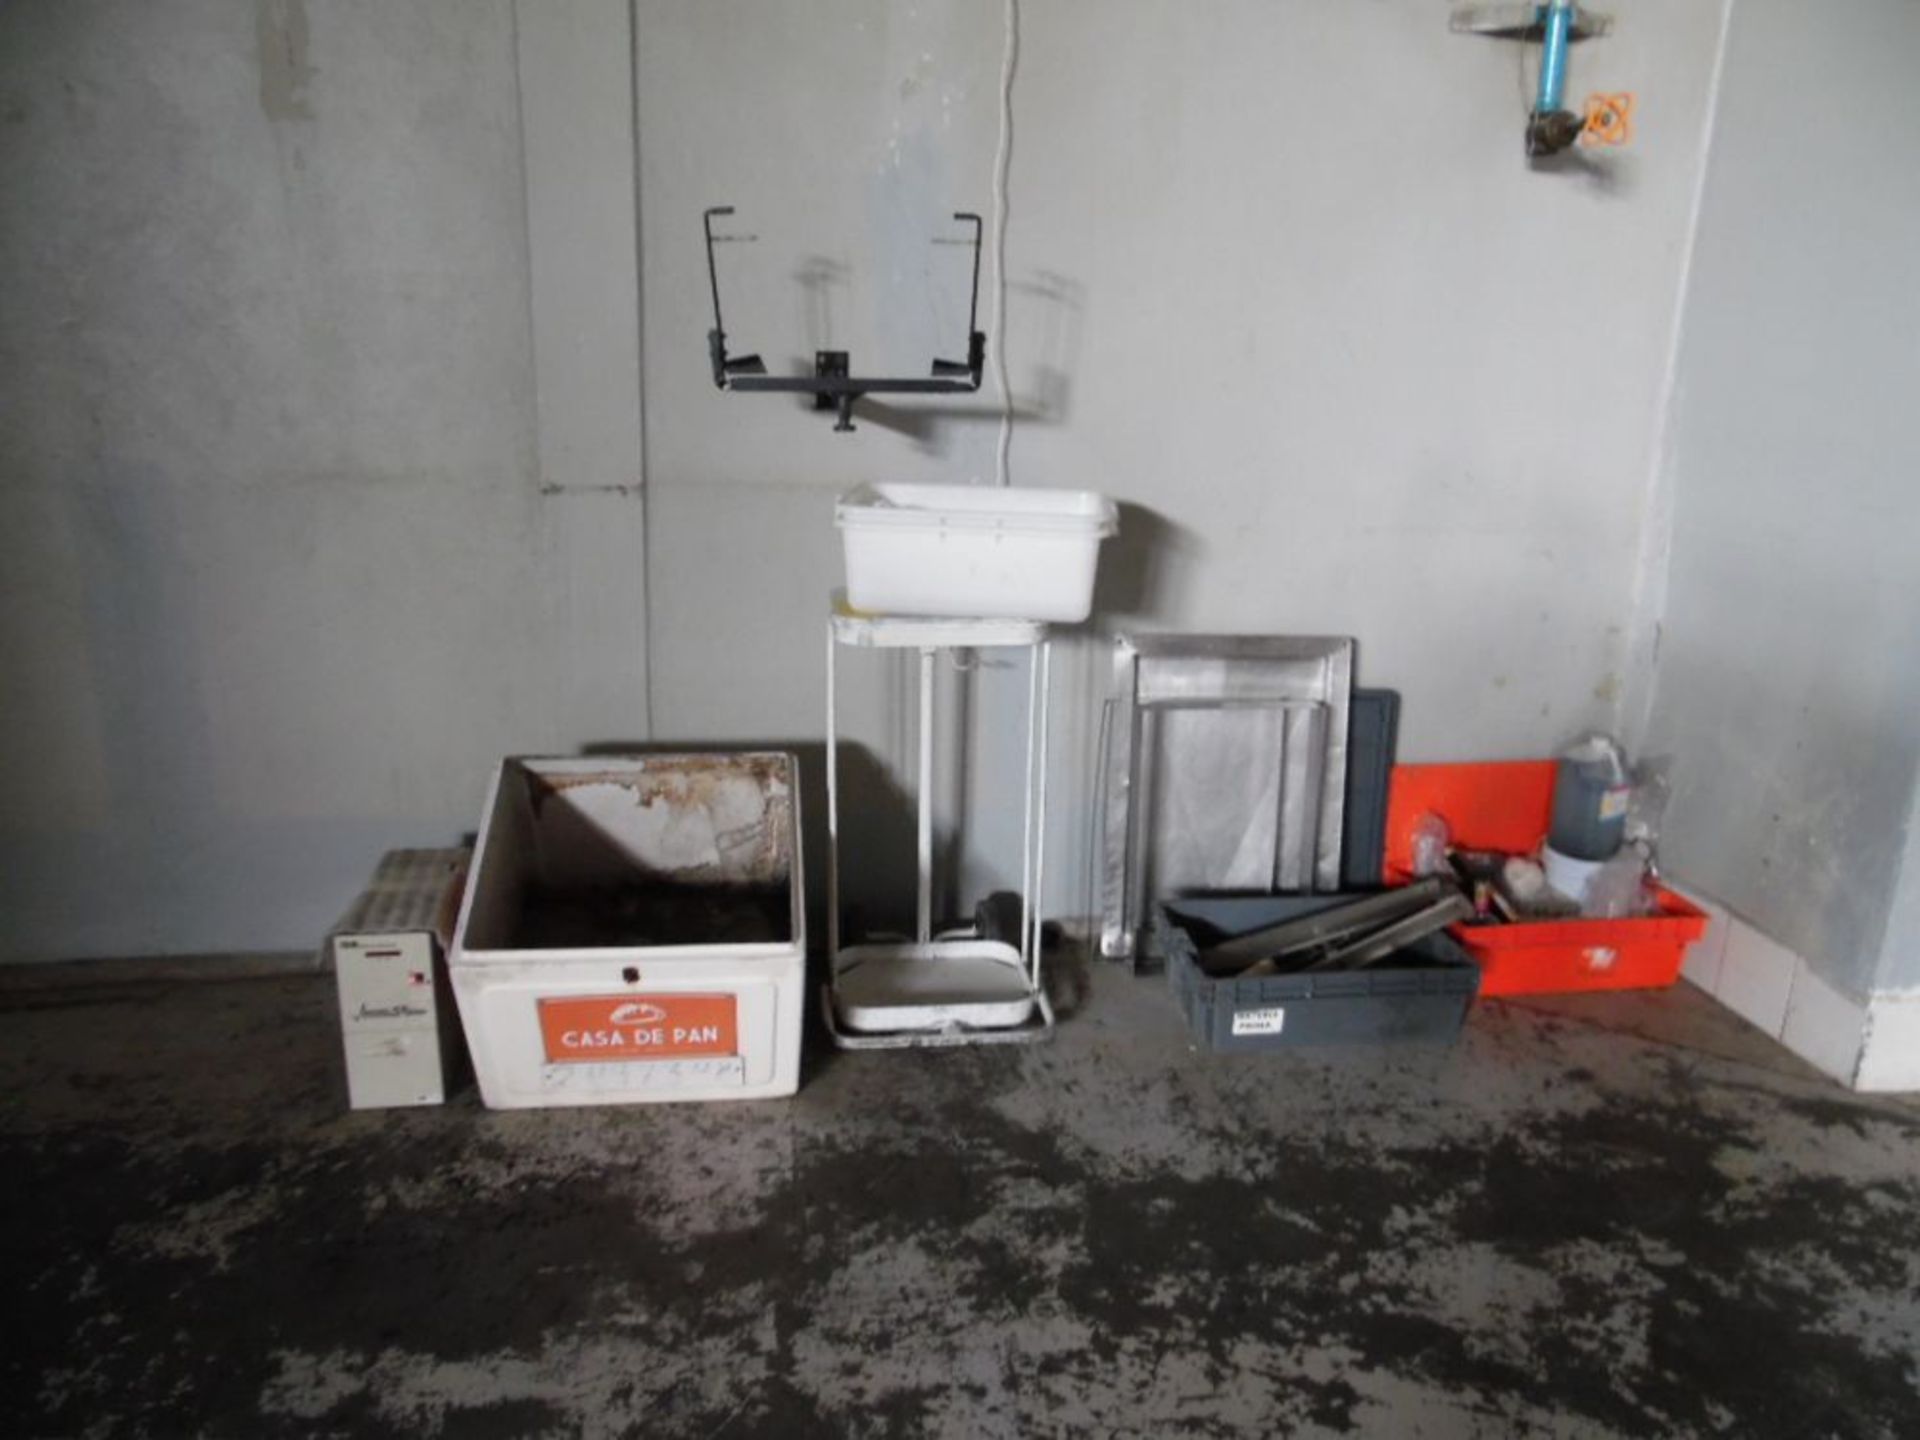 LOT OF VARIOUS INCLUDES: SHELF, LOCKER, BAKING SHEET PARTS OF RAW MATERIAL, CART AND BOX WITH - Image 2 of 3